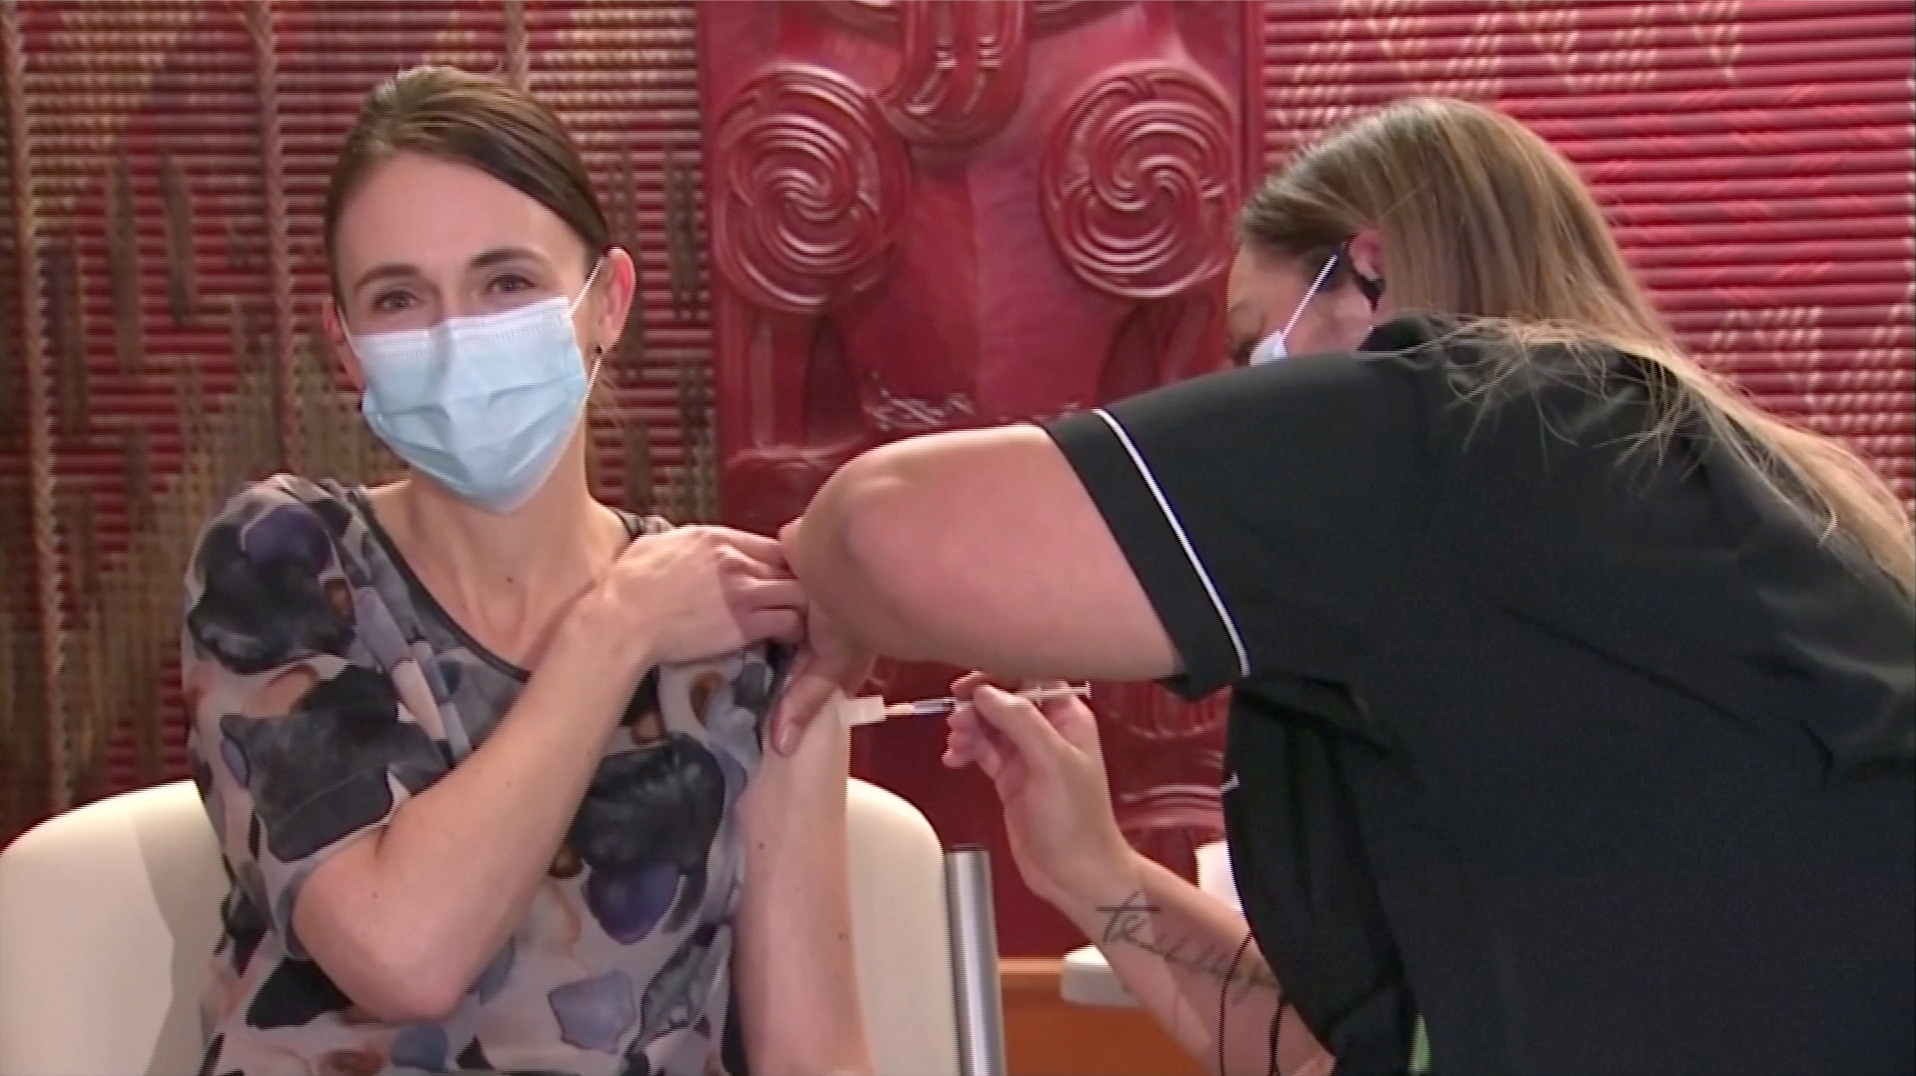 New Zealand's Prime Minister Jacinda Ardern receives her first dose of the Pfizer coronavirus disease (COVID-19) vaccine at a vaccination centre in Auckland, New Zealand, June 18, 2021, in this still image taken from video.  TVNZ / via REUTERS TV